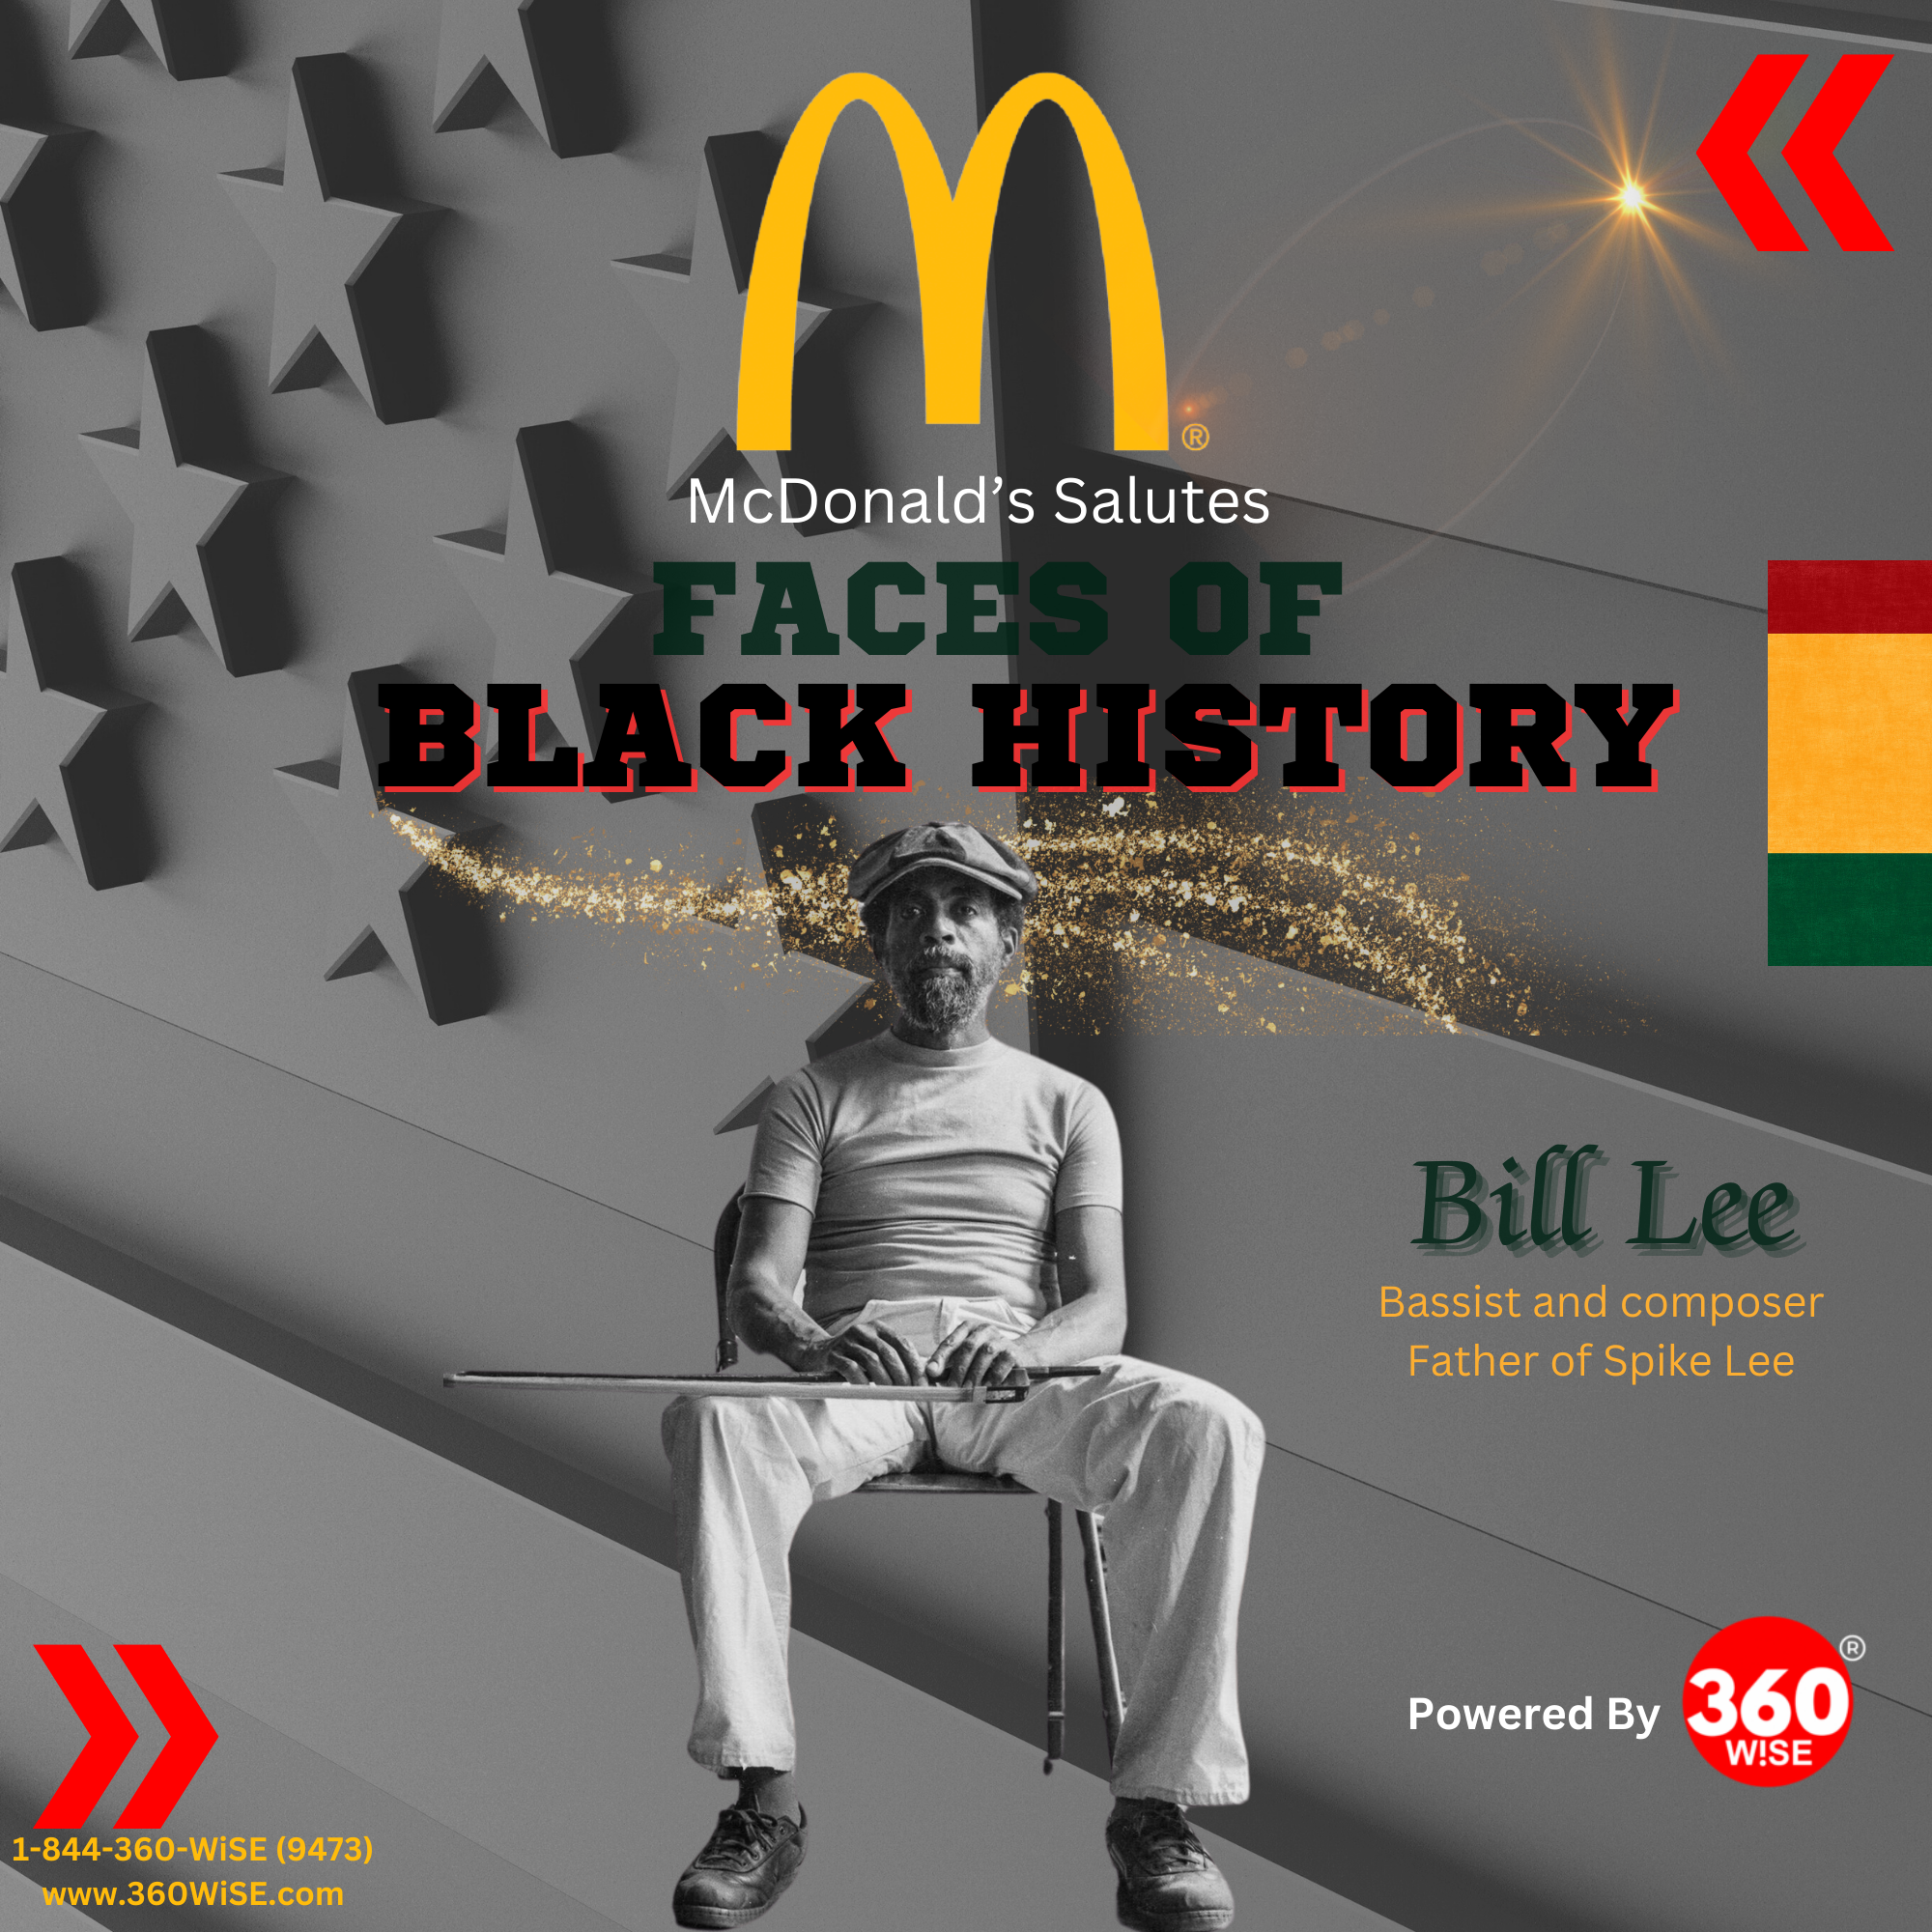 McDonald's Faces of Black History Salutes Billy Lee. Powered by 360WiSE